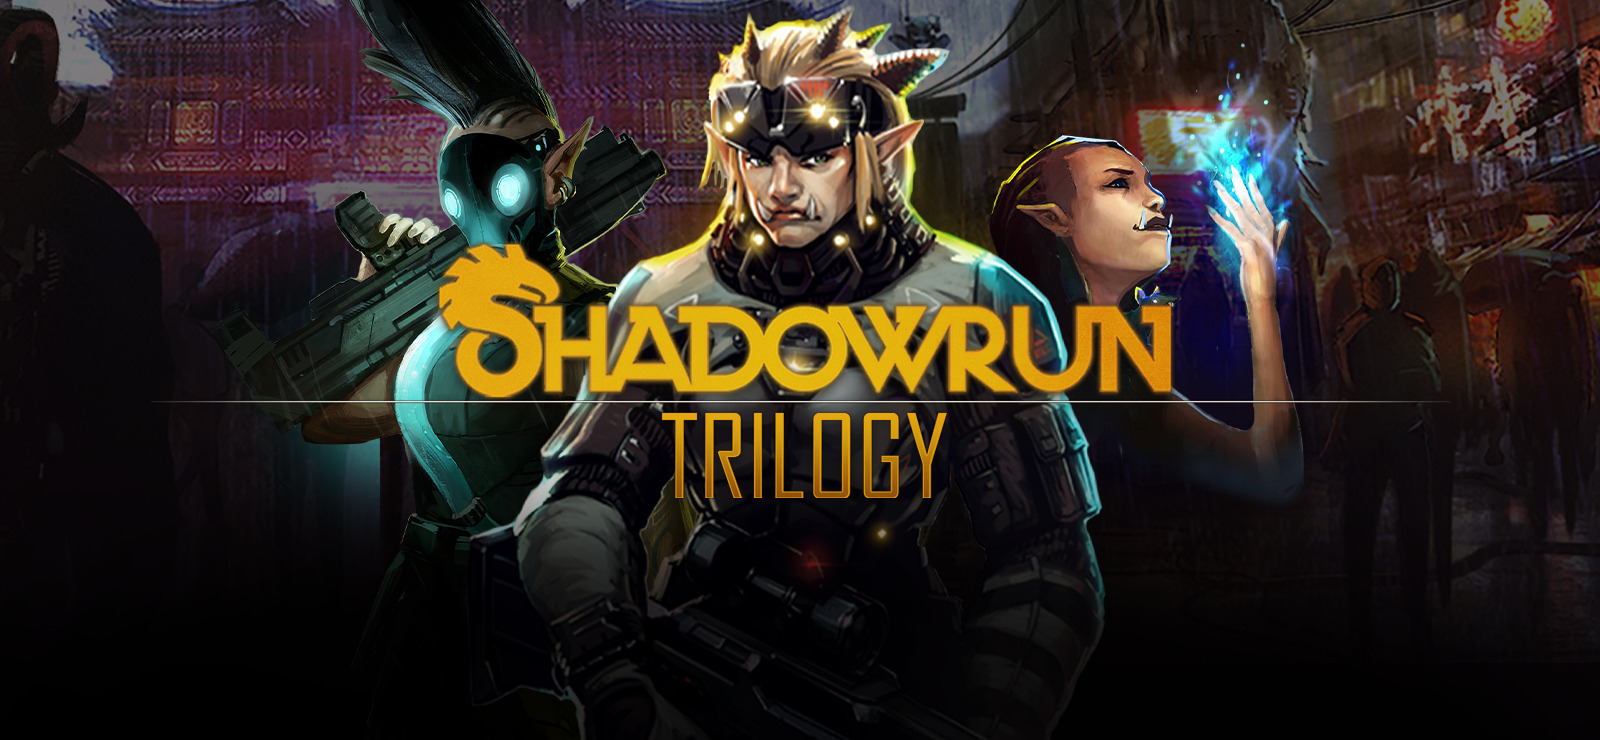 Shadowrun Trilogy And Four Other Games Join Xbox Game Pass - Game